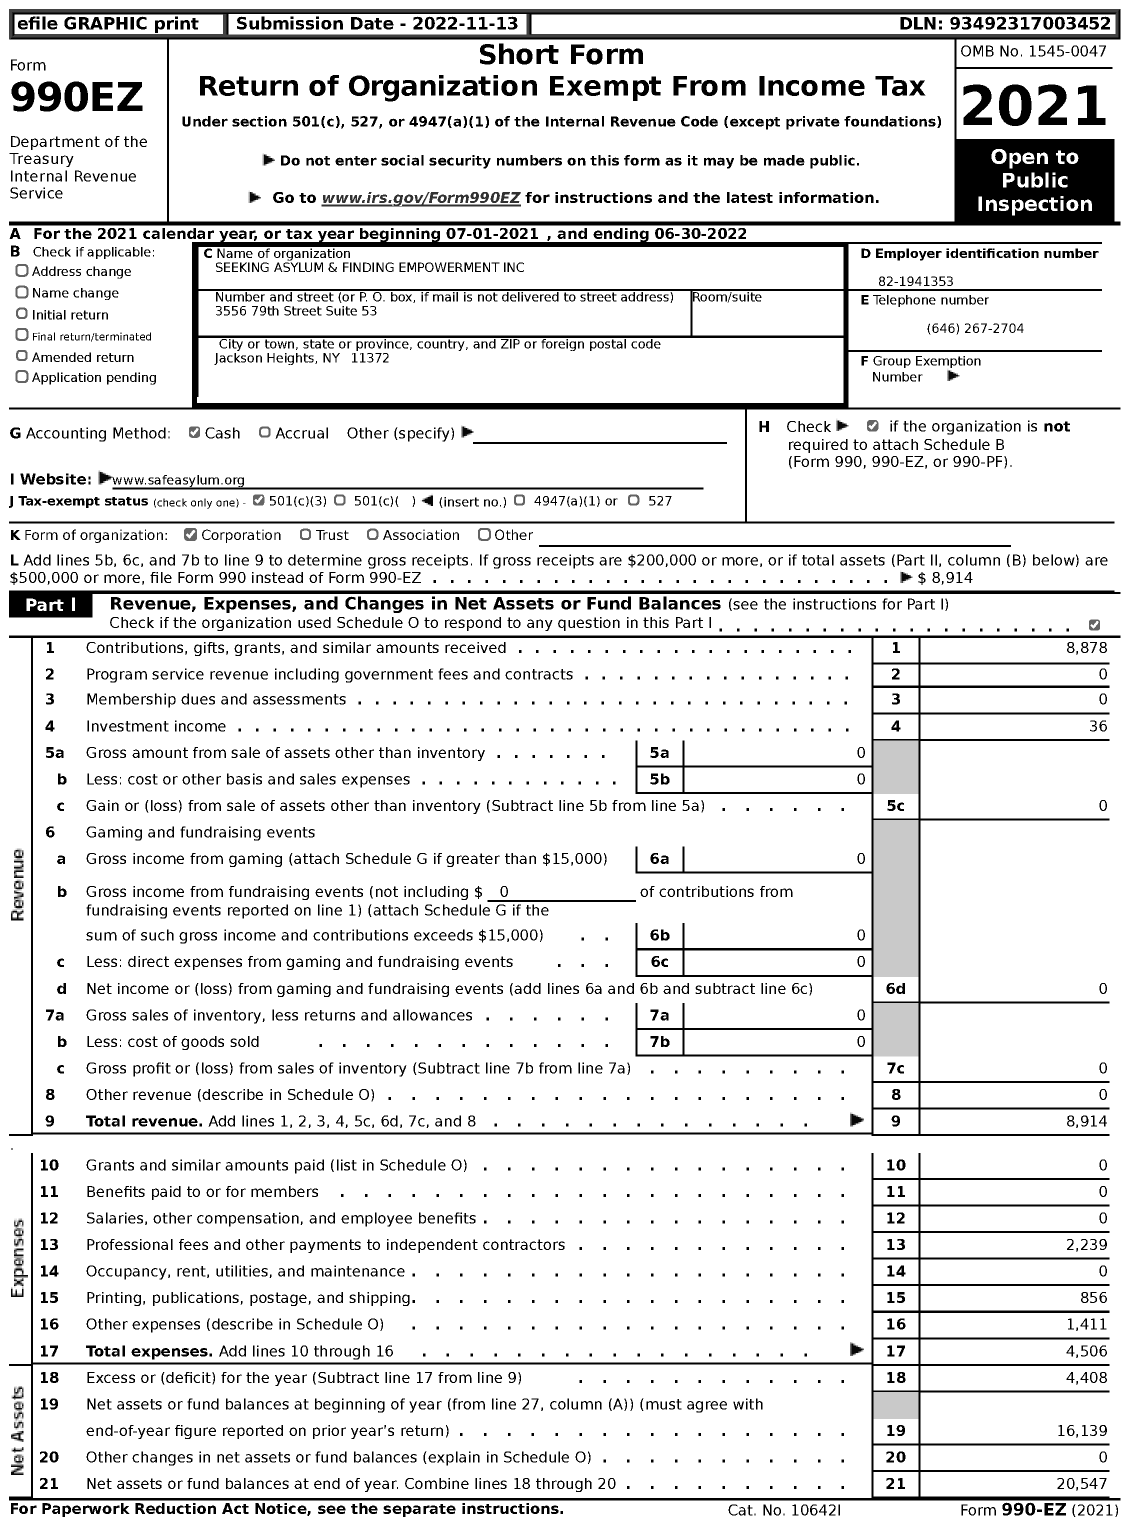 Image of first page of 2021 Form 990EZ for Seeking Asylum and Finding Empowerment